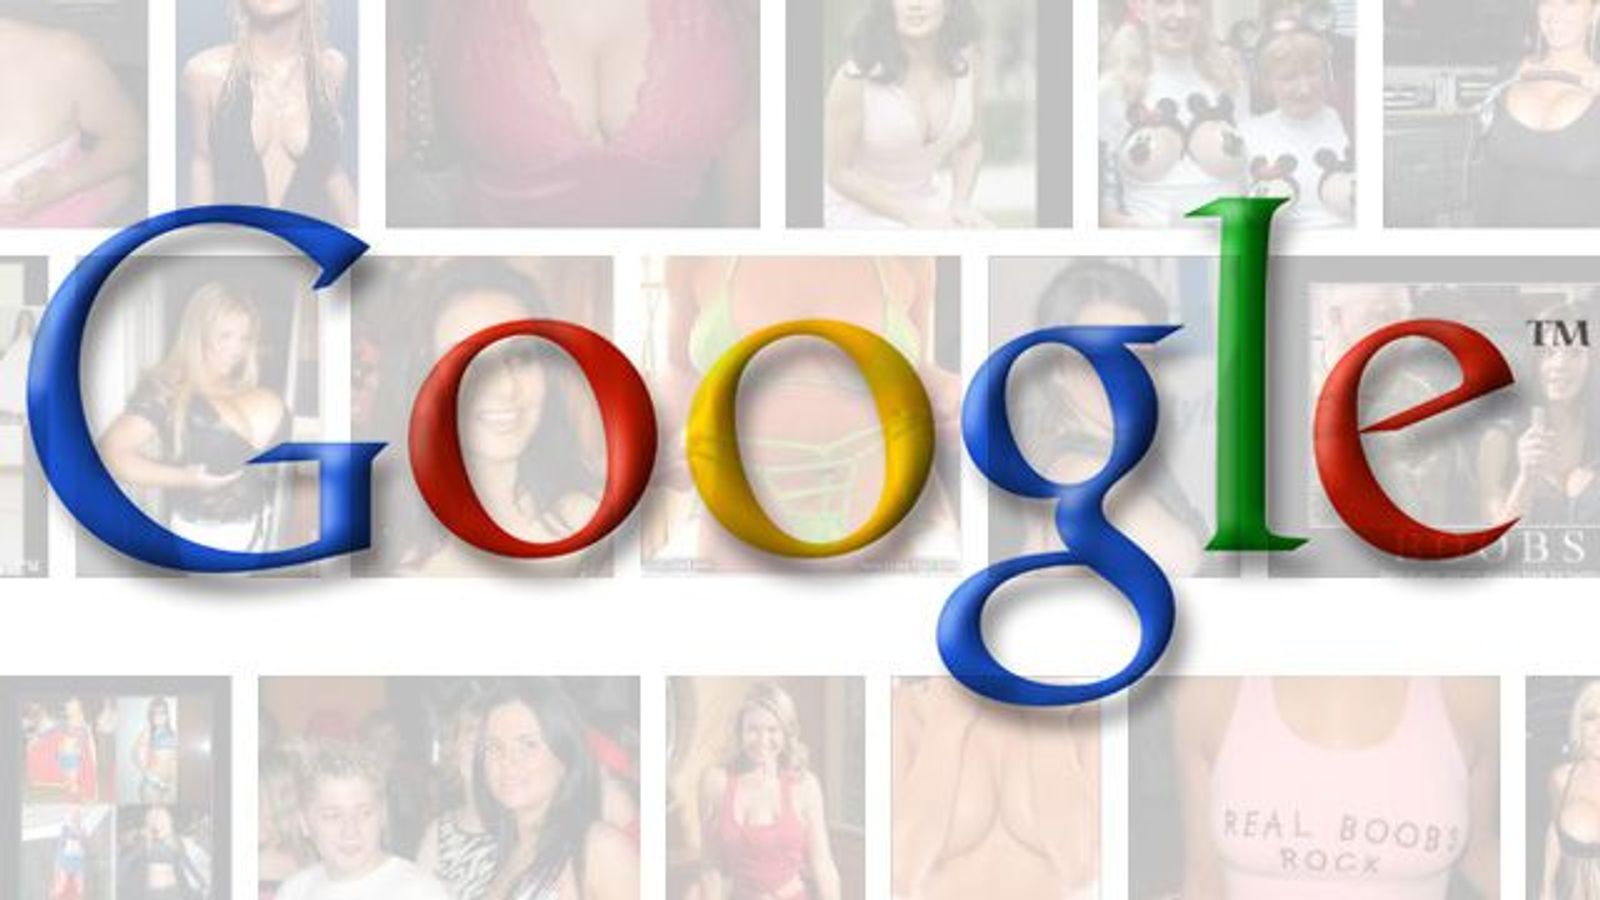 Google Questioned About Porn Results in Image